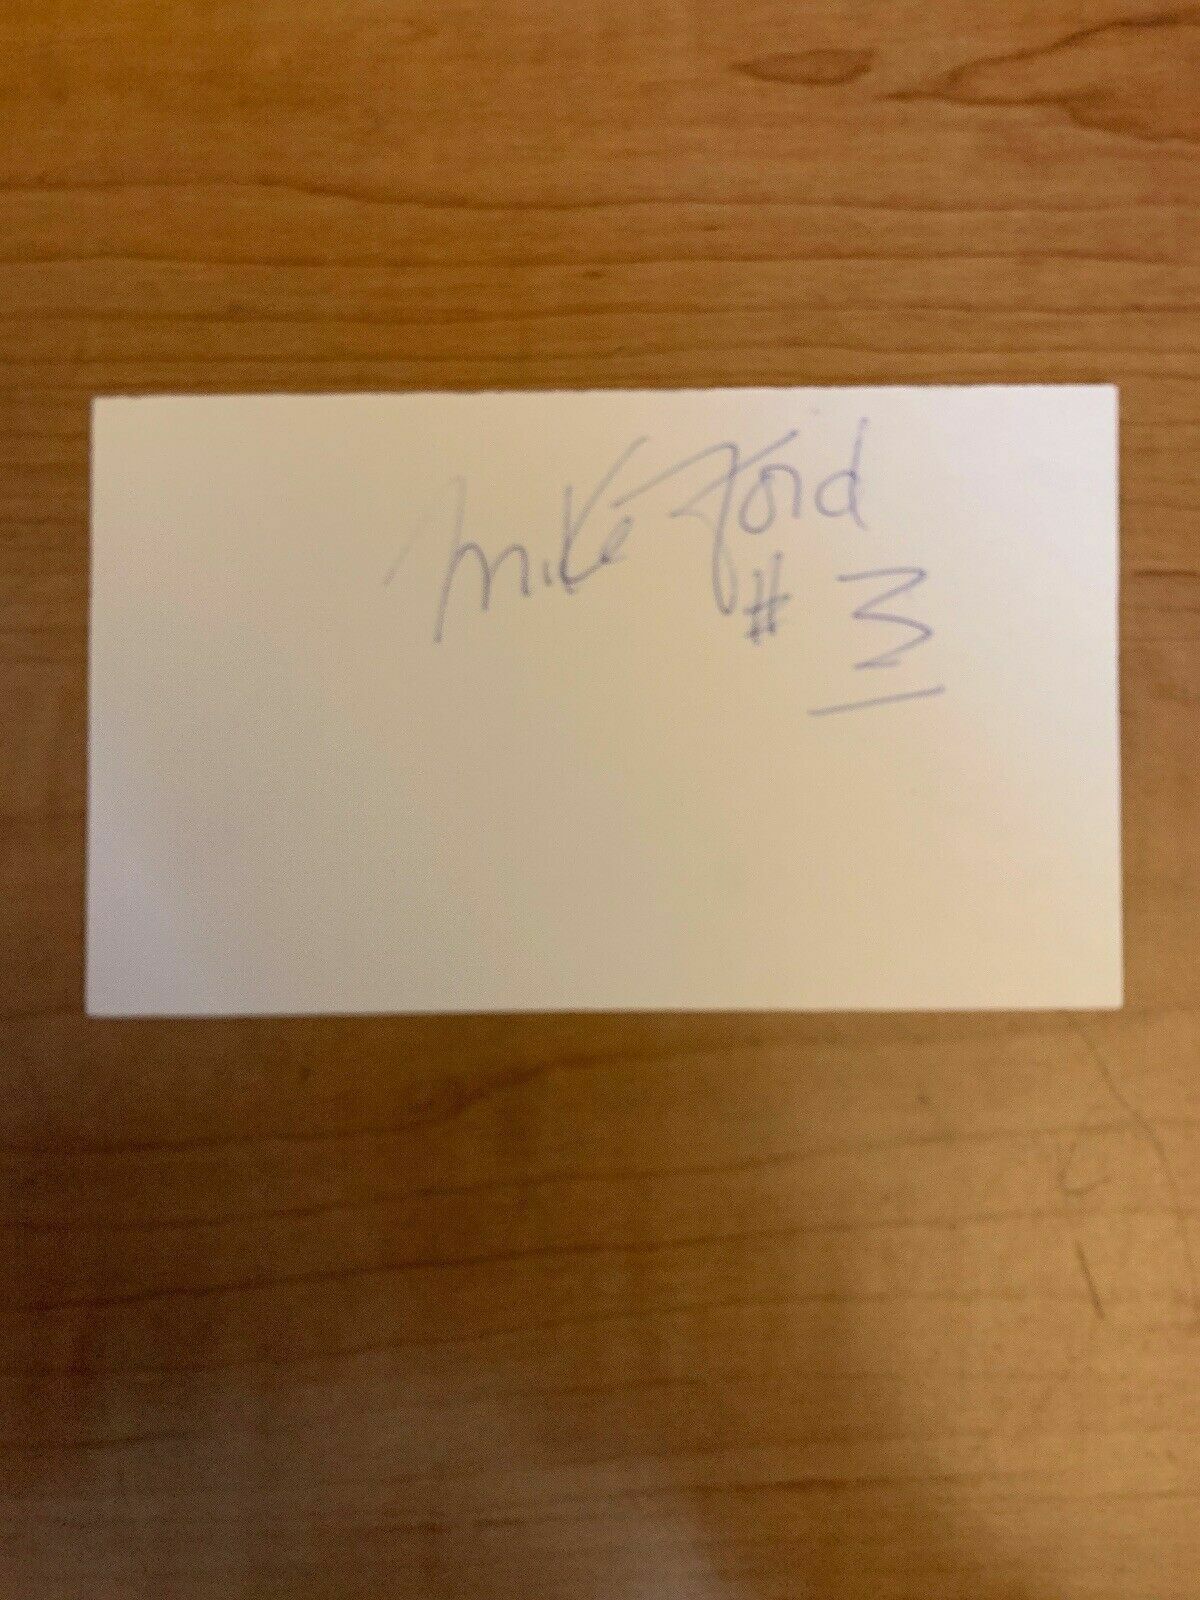 MIKE FORD - HOCKEY - AUTHENTIC AUTOGRAPH SIGNED- B4785